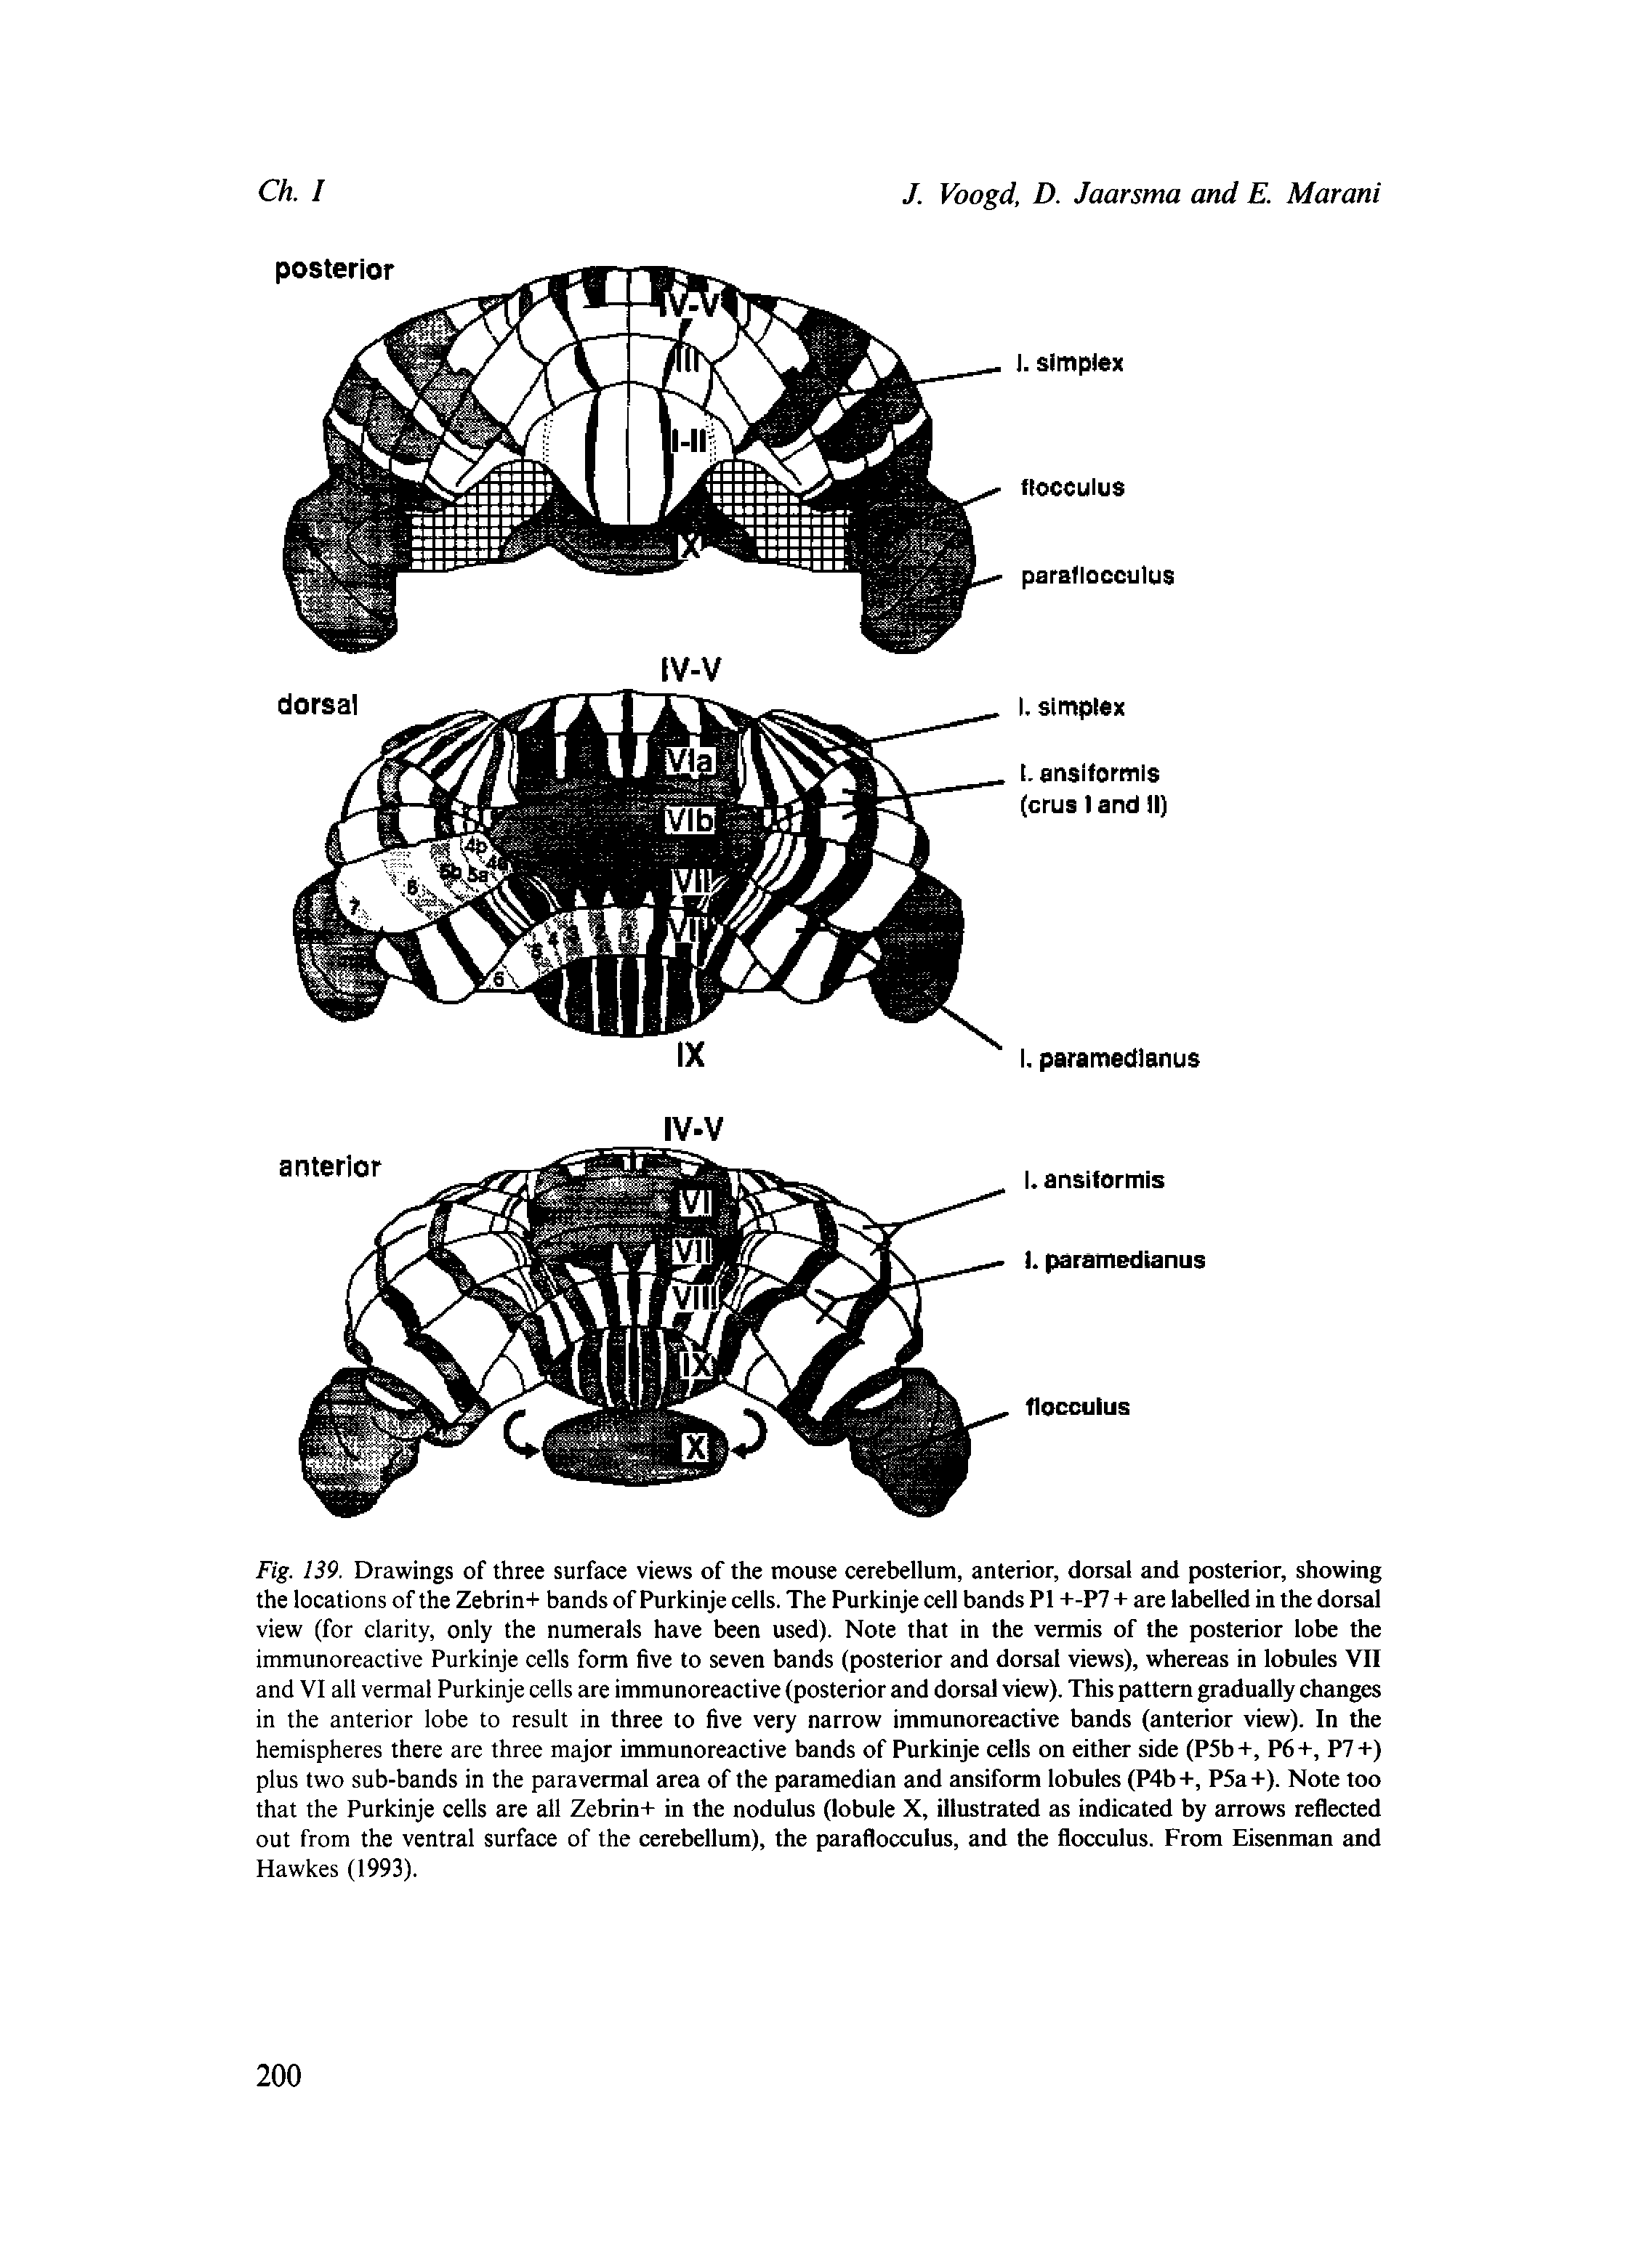 Fig. 139. Drawings of three surface views of the mouse cerebellum, anterior, dorsal and posterior, showing the locations of the Zebrin+ bands of Purkinje cells. The Purkinje cell bands PI +-P7 + are labelled in the dorsal view (for clarity, only the numerals have been used). Note that in the vermis of the posterior lobe the immunoreactive Purkinje cells form five to seven bands (posterior and dorsal views), whereas in lobules VII and VI all vermal Purkinje cells are immunoreactive (posterior and dorsal view). This pattern gradually changes in the anterior lobe to result in three to five very narrow immunoreactive bands (anterior view). In the hemispheres there are three major immunoreactive bands of Purkinje cells on either side (P5b+, P6+, P7+) plus two sub-bands in the para vermal area of the paramedian and ansiform lobules (P4b-t, P5a+). Note too that the Purkinje cells are all Zebrin+ in the nodulus (lobule X, illustrated as indicated by arrows reflected out from the ventral surface of the cerebellum), the paraflocculus, and the flocculus. From Eisenman and Hawkes (1993).